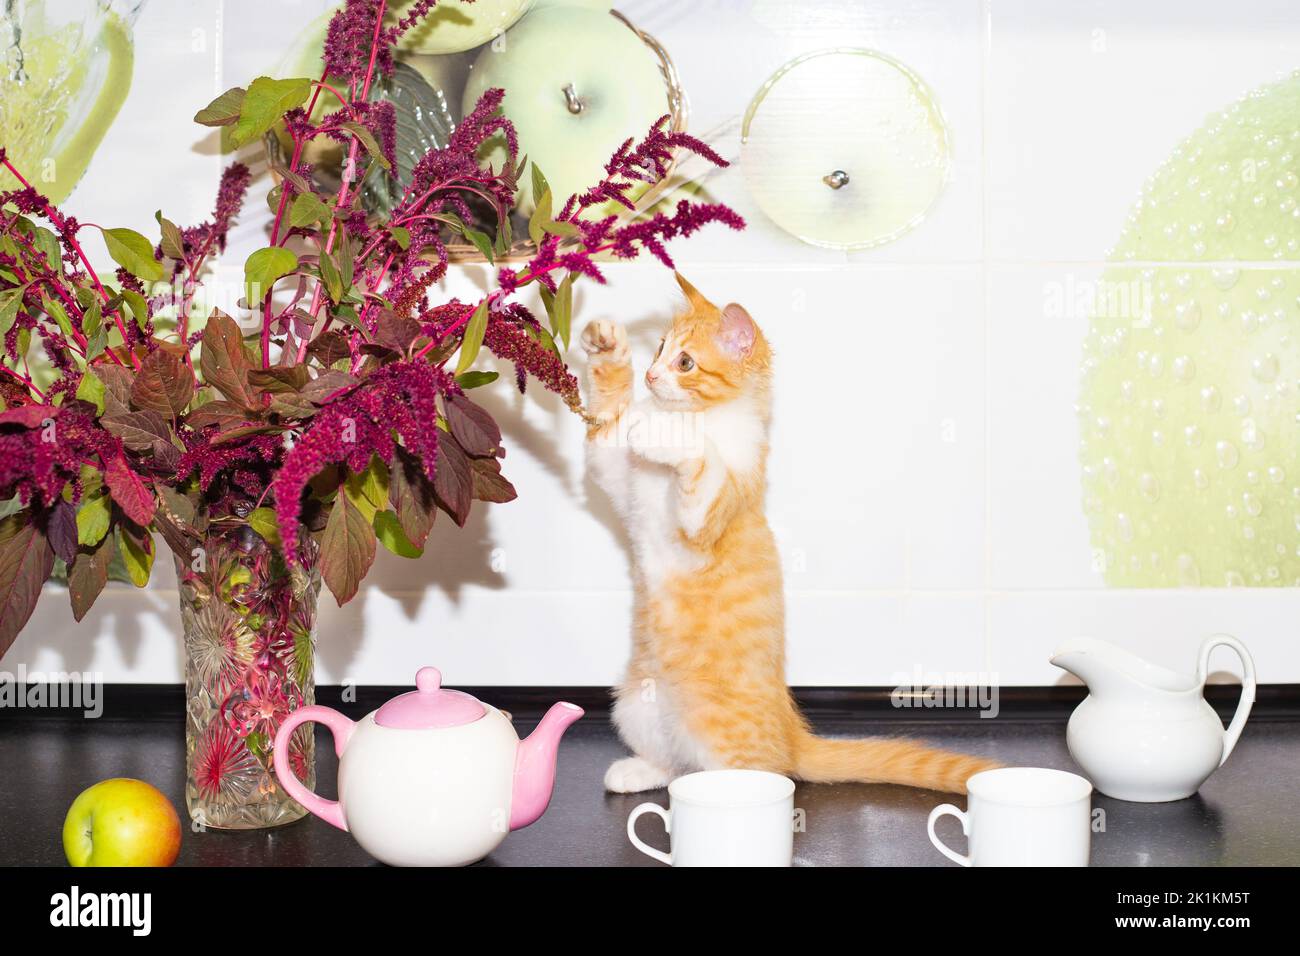 The kitten is playing with a flower on the kitchen worktop with dishes. Cute pets in the interior of the house. Stock Photo